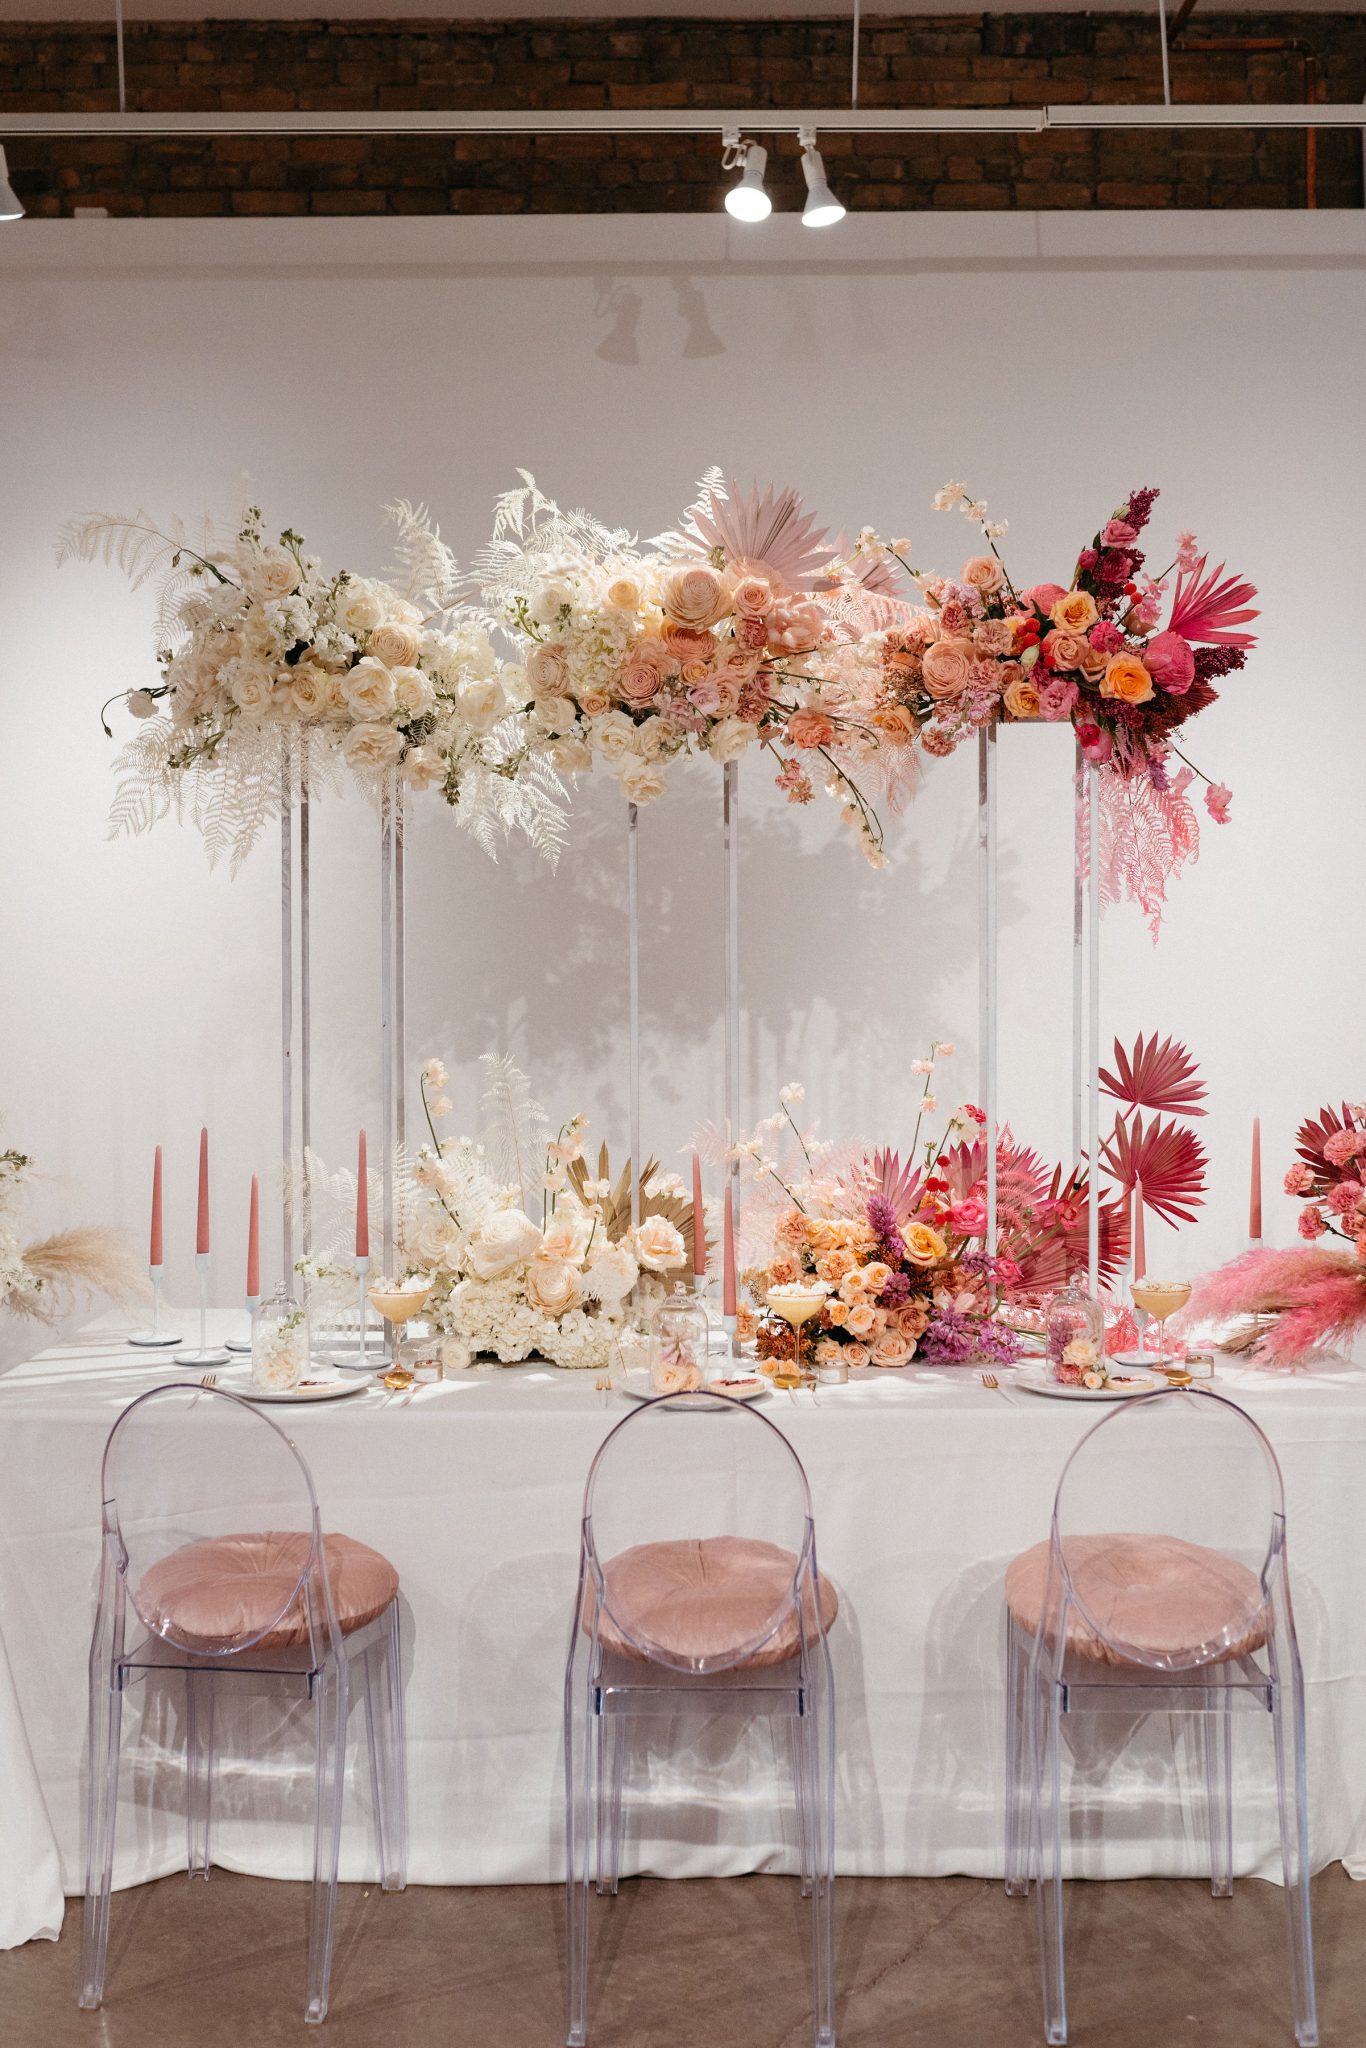 Pink ombre floral installation above a wedding table for wedding decor inspiration